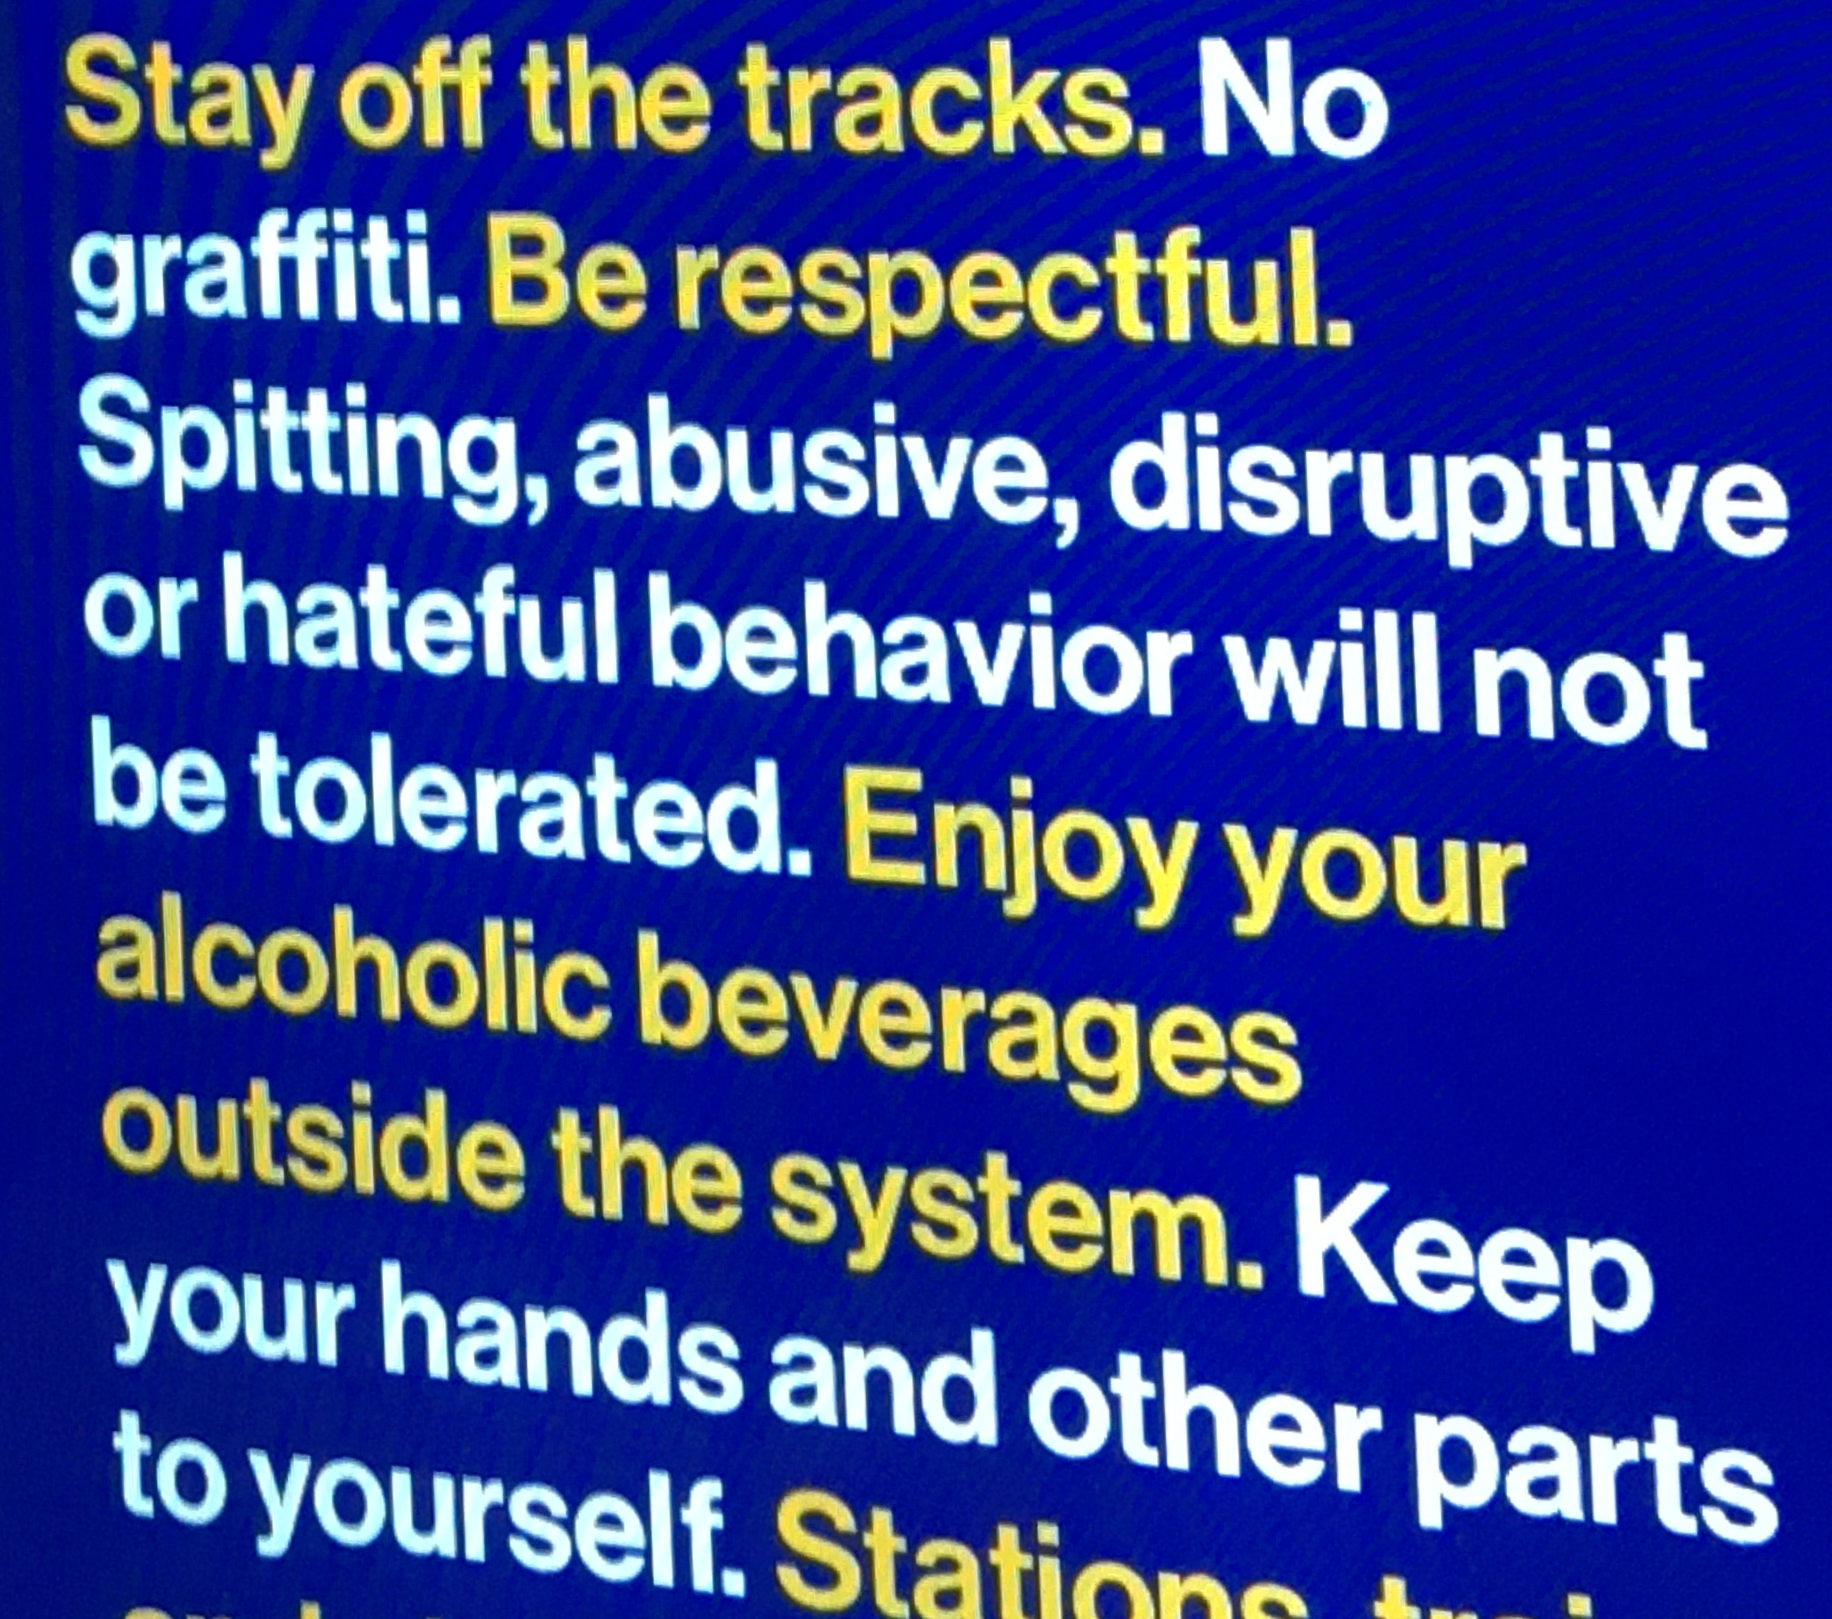 Photo of NYC subway rules, "stay off tracks. No graffitti. Be respectful. Spitting, abusive, disruptive or hateful behavior will not be tolerated..." Blue background, yellow and white text